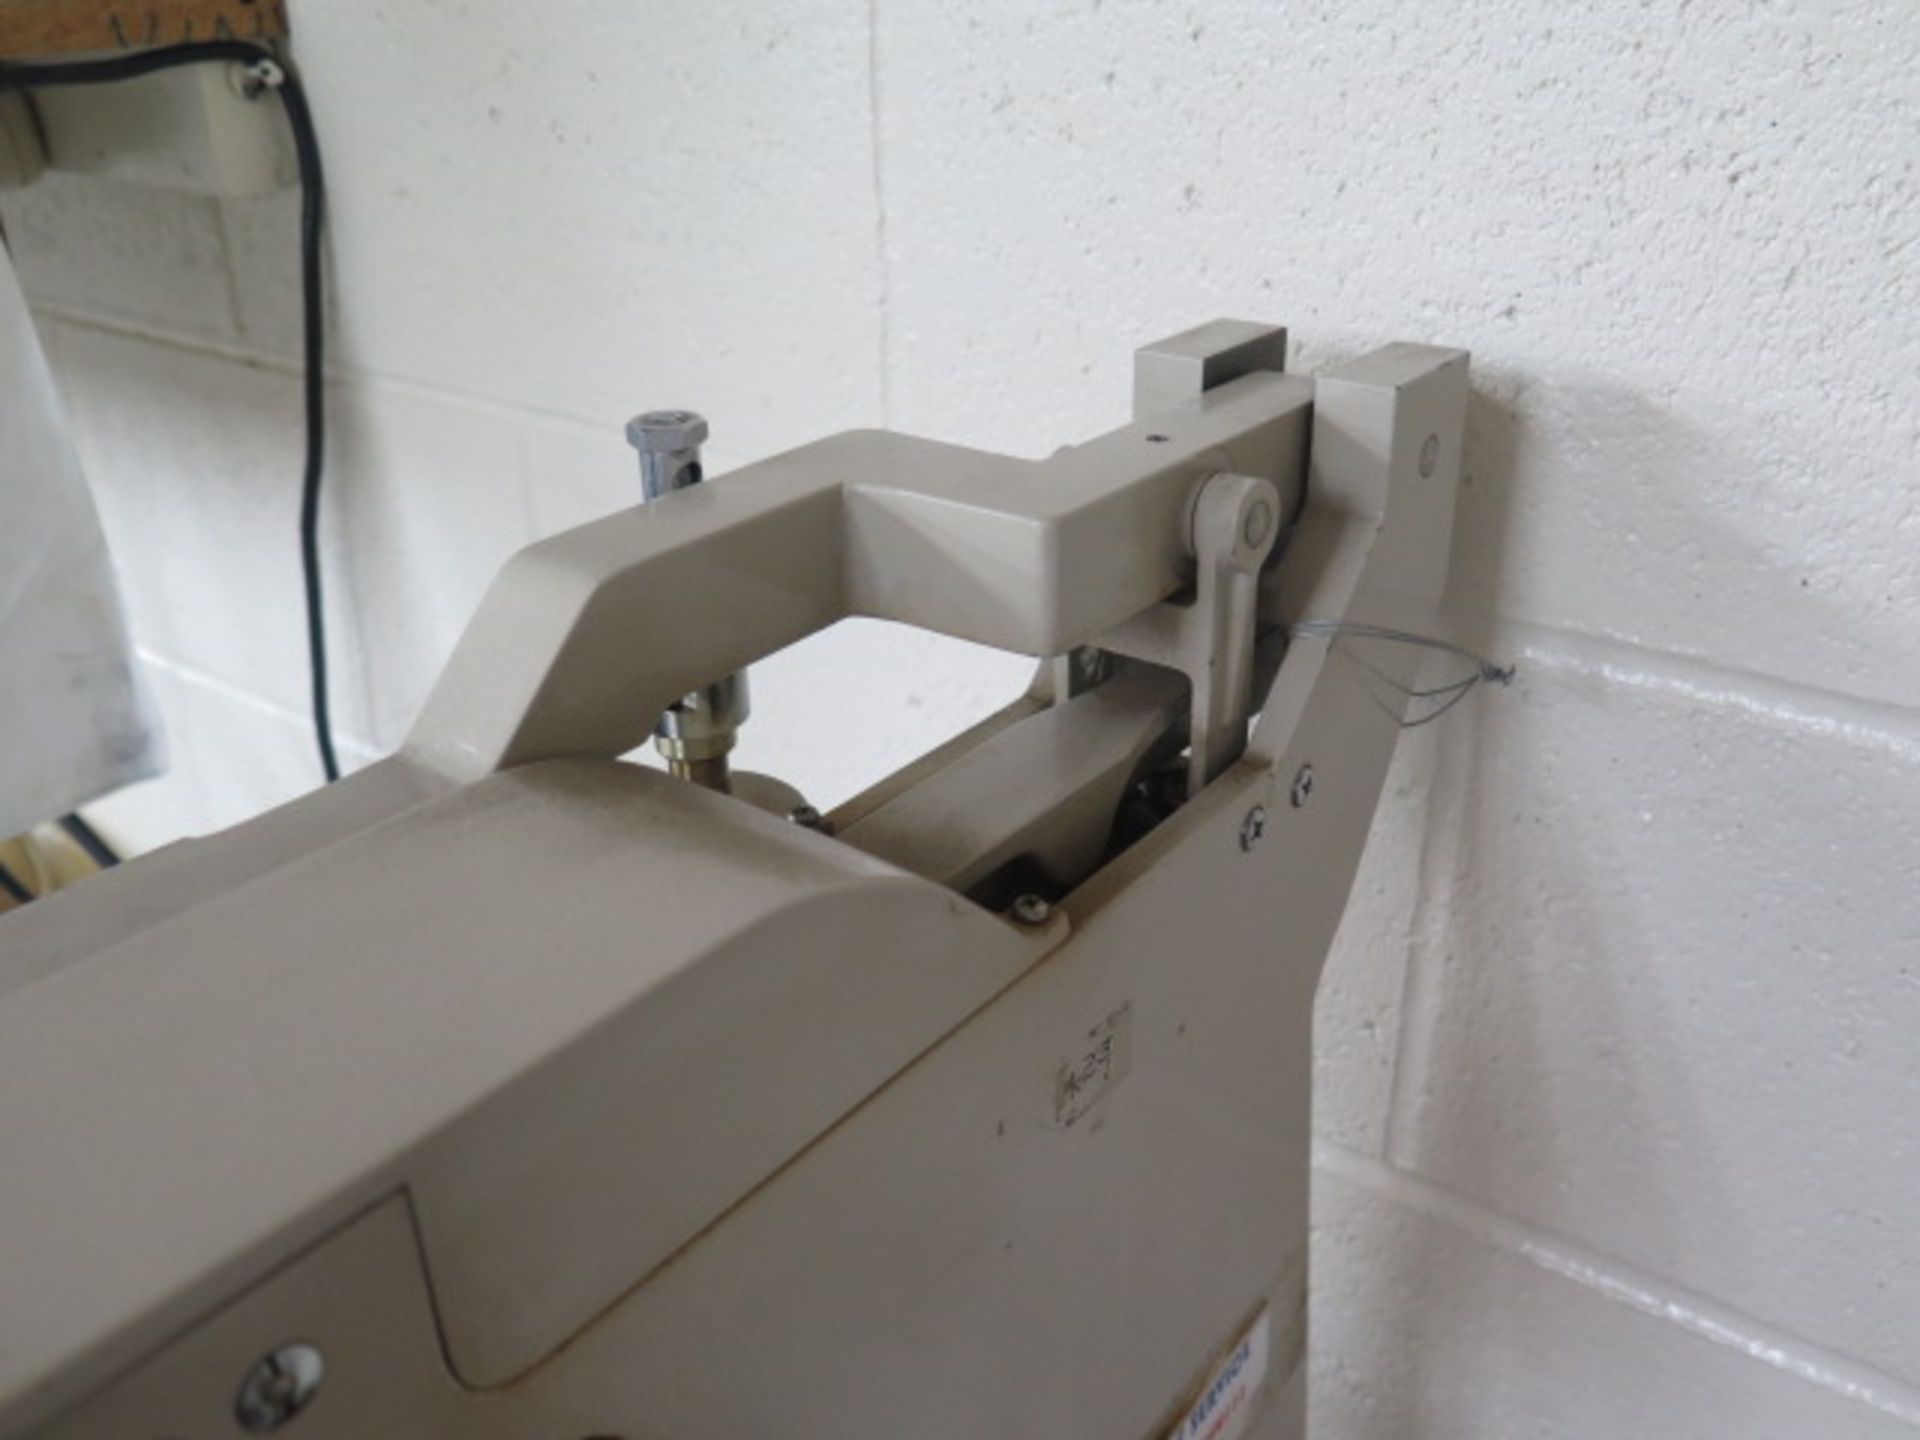 Mitutoyo mdl. 940-130 Rockwell Hardness Tester (SOLD AS-IS - NO WARRANTY) - Image 10 of 18